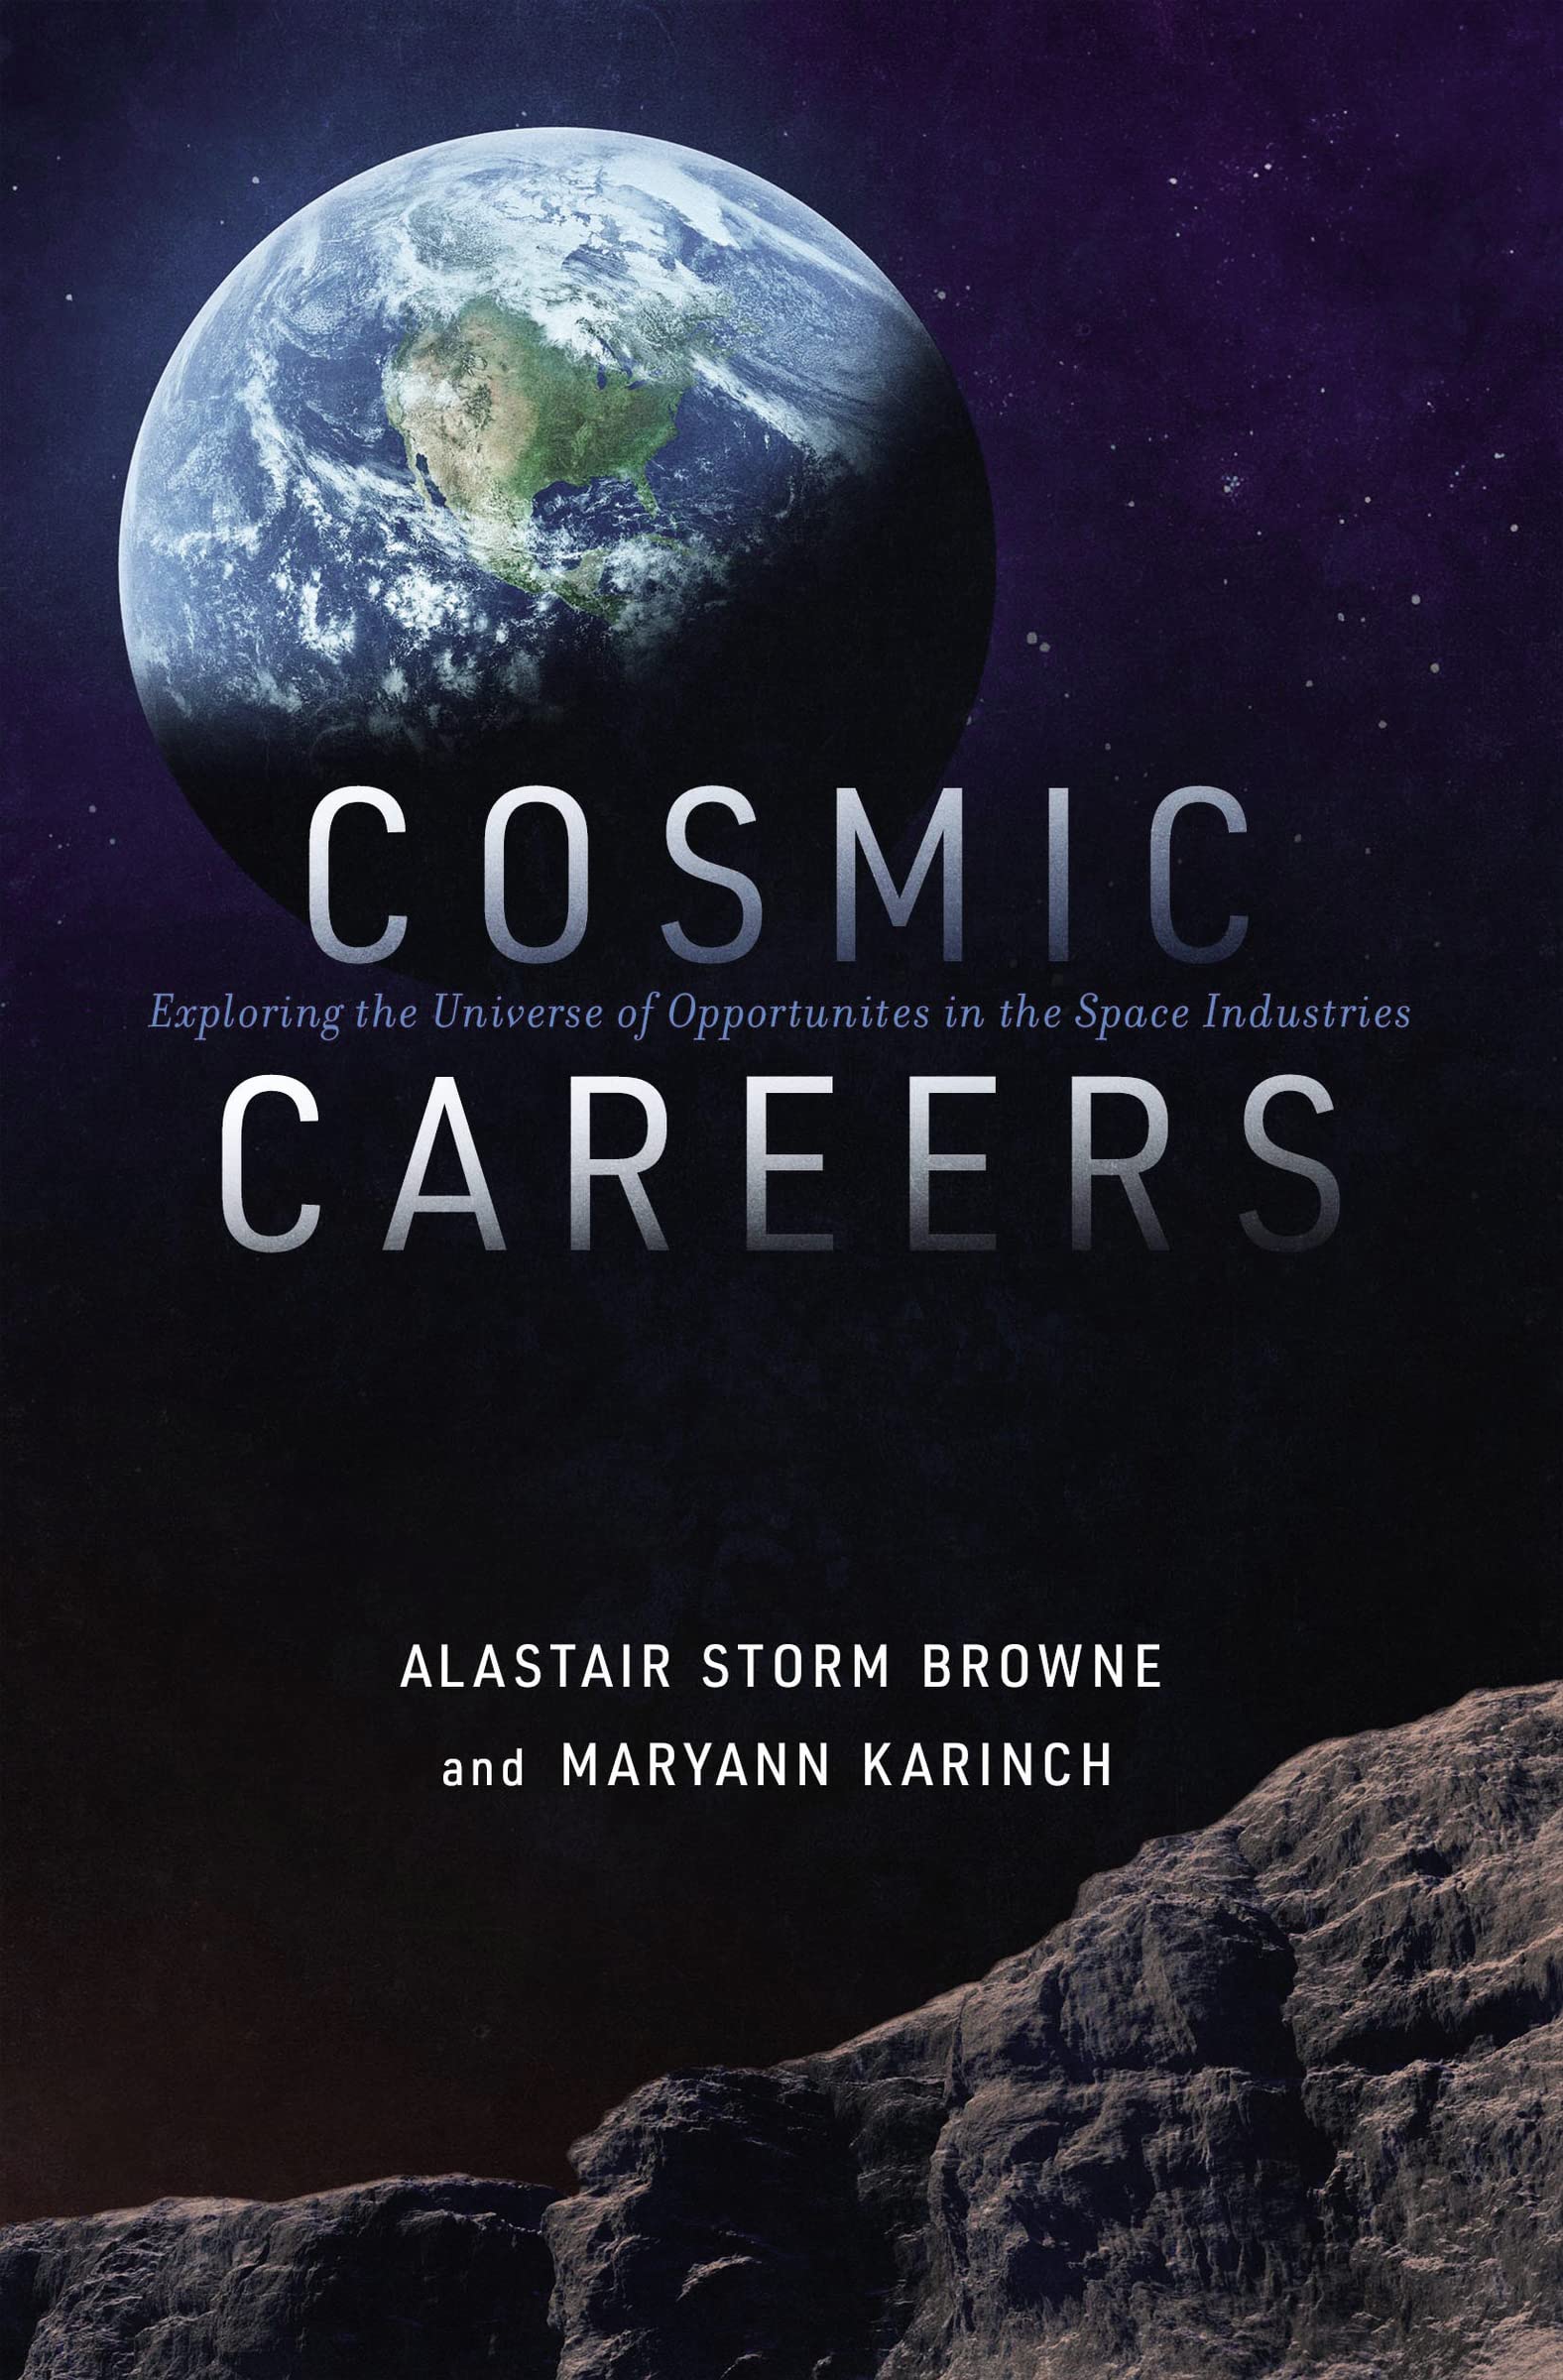 Cosmic careers: exploring the universe of opportunities in the space industries by Alastair Storm Browne and maryann karinch